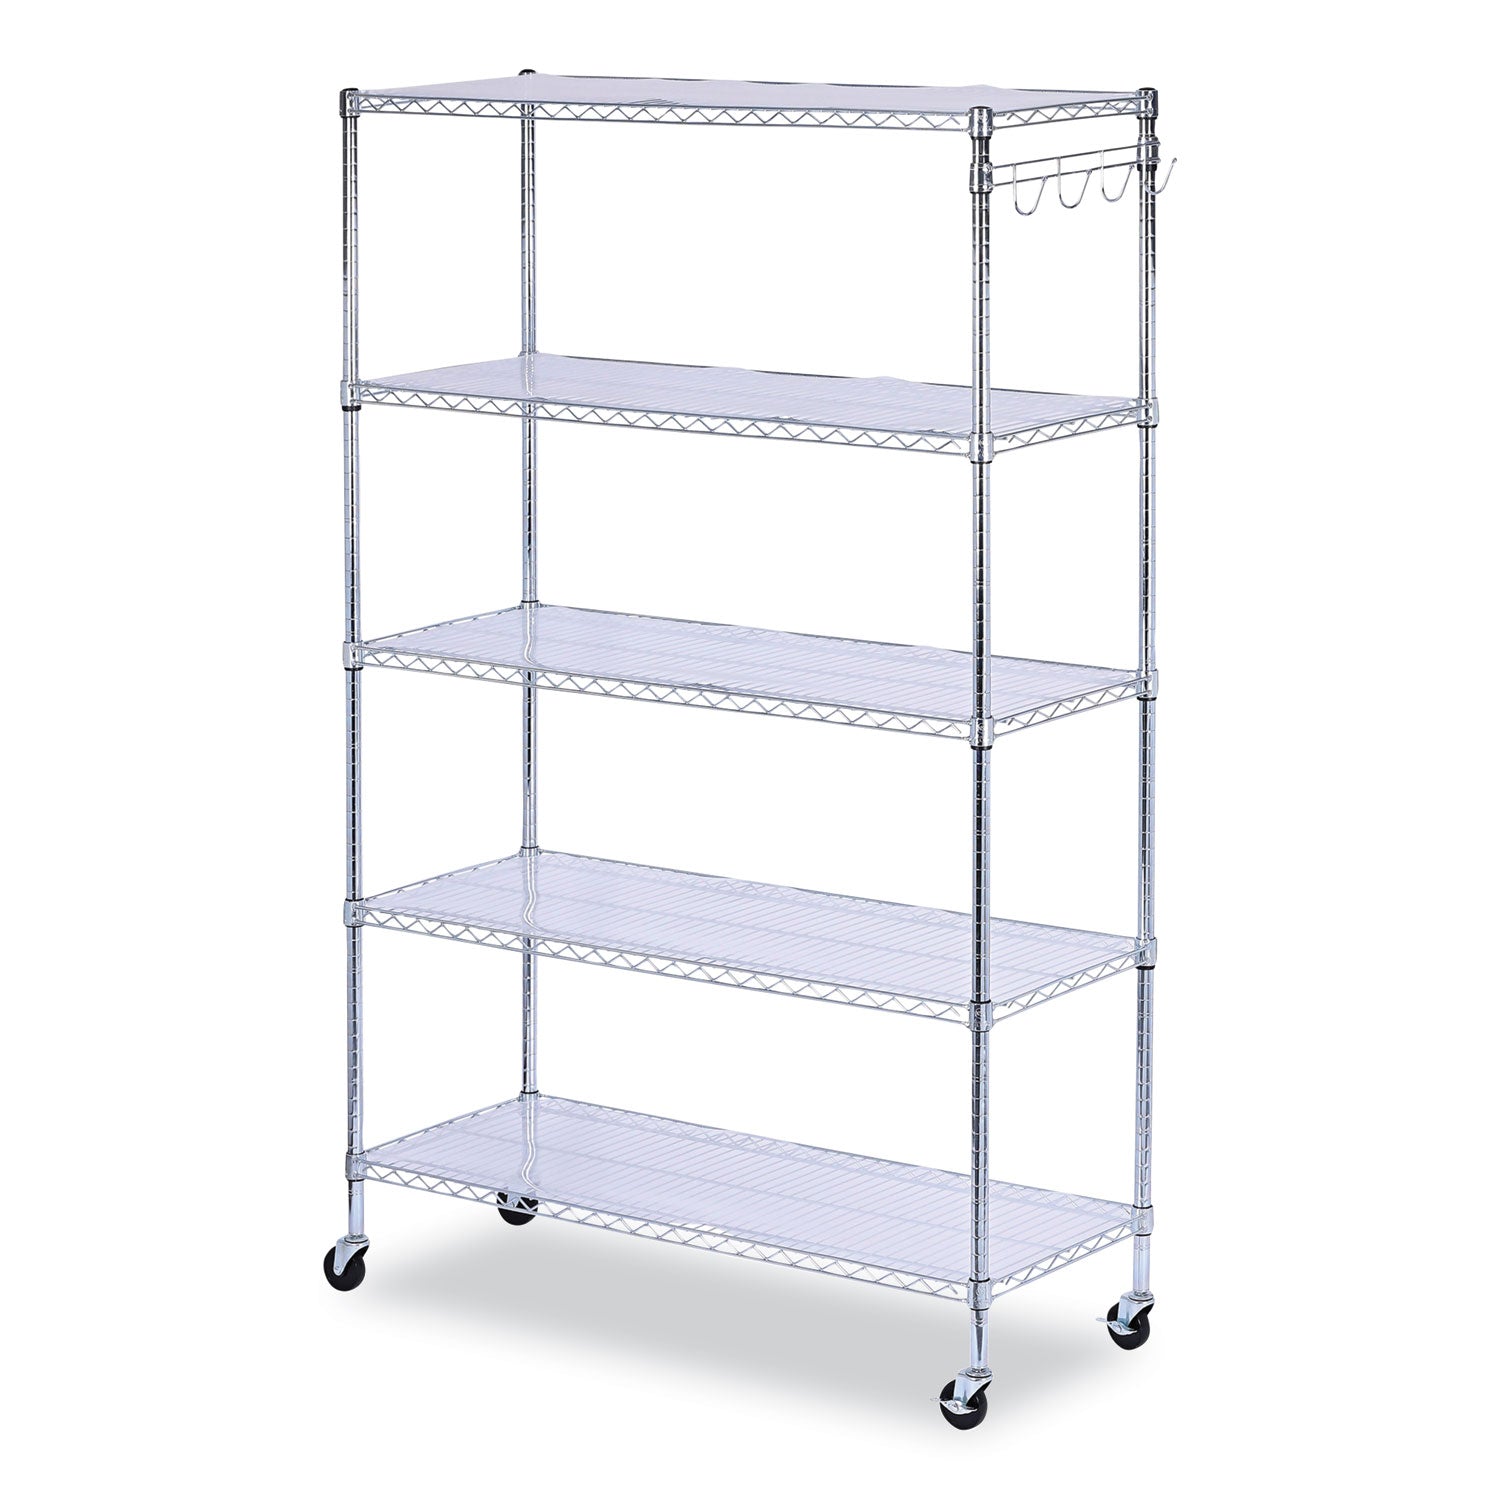 5-shelf-wire-shelving-kit-with-casters-and-shelf-liners-48w-x-18d-x-72h-silver_alesw654818sr - 1